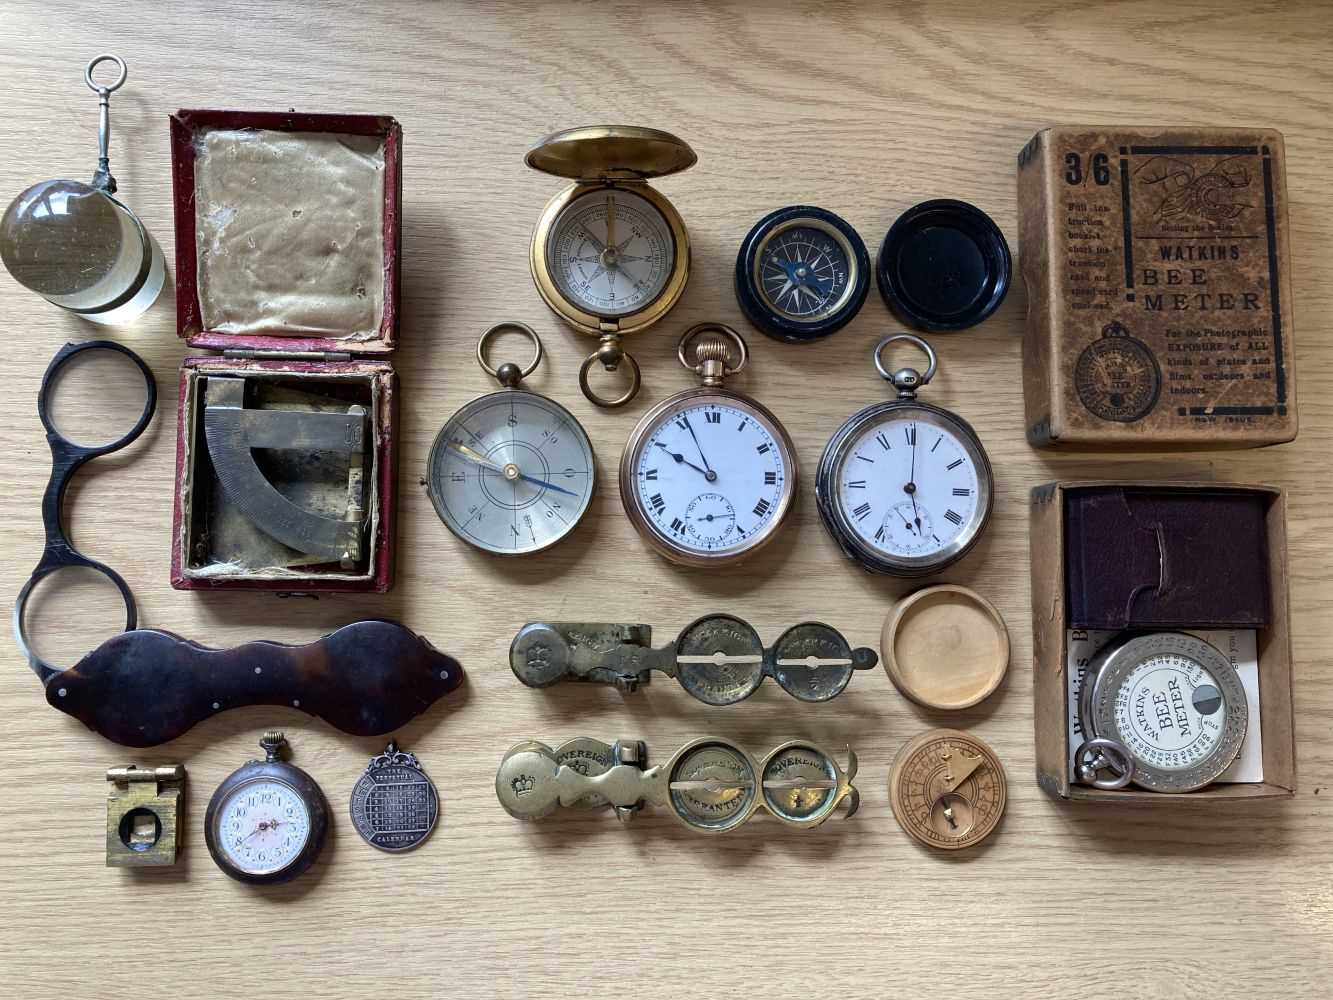 Lot 88 - Compasses and Pocket Watches